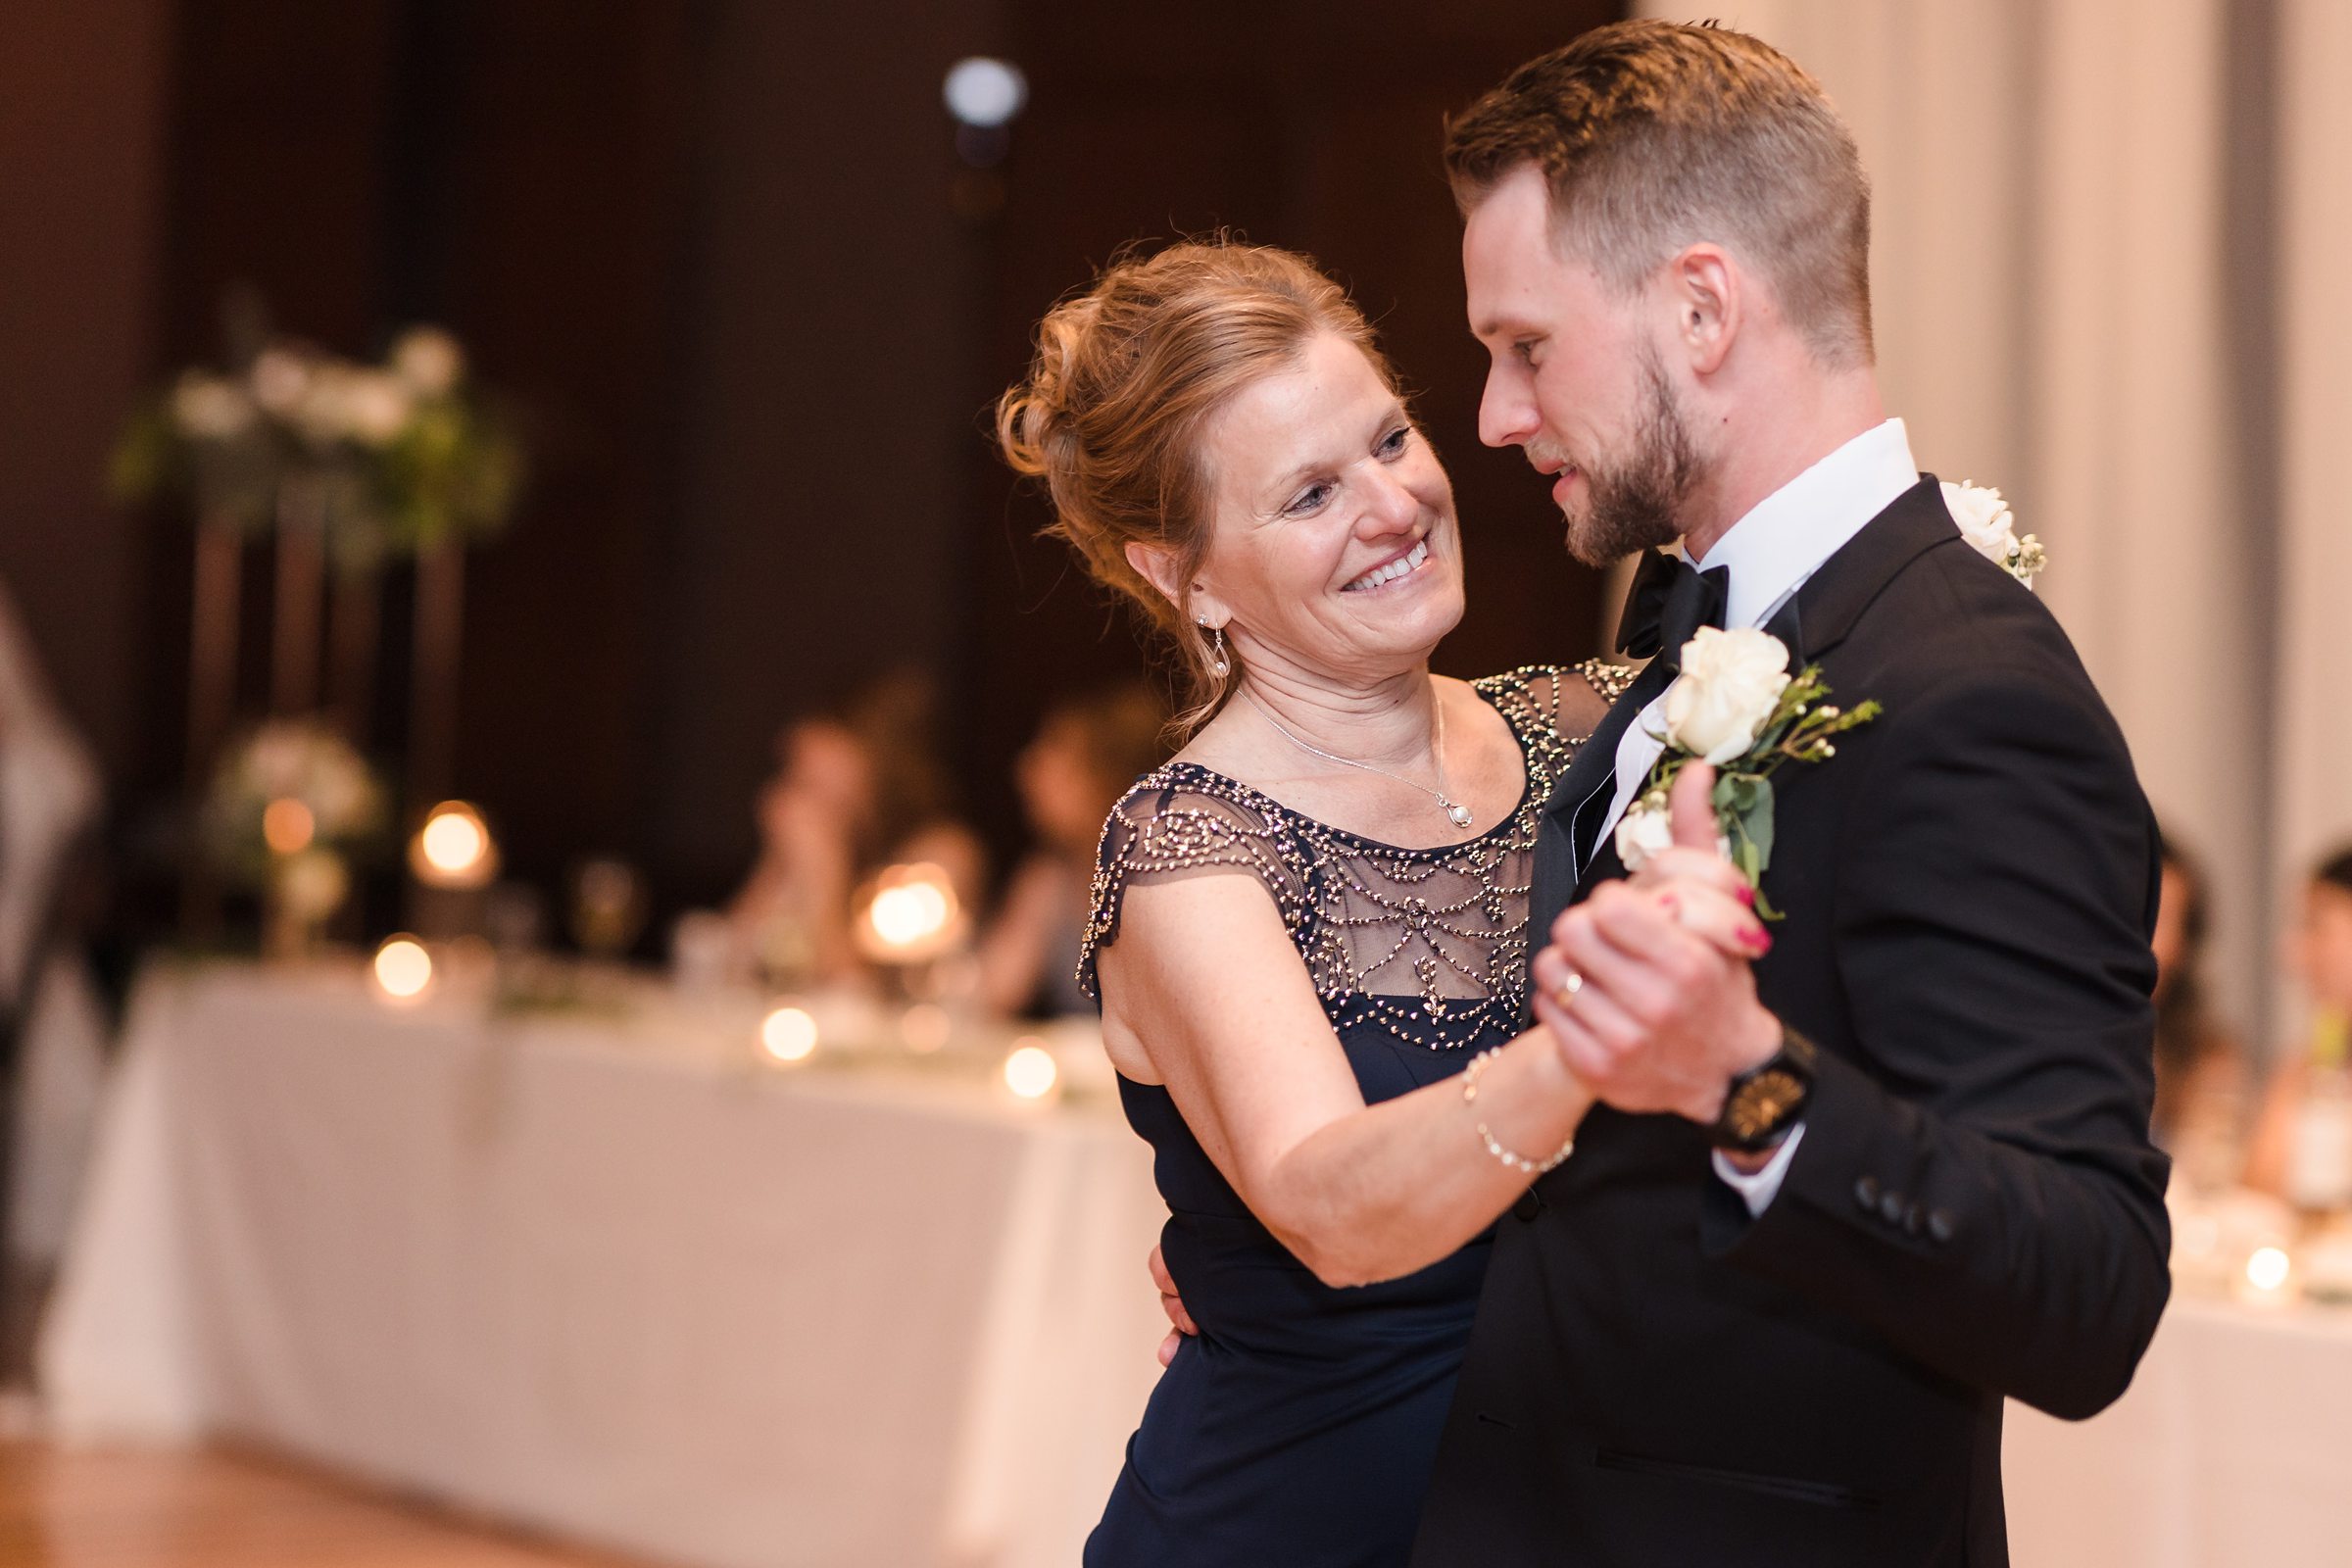 Groom dances with her mom during his wedding at the Chevy Chase Country Club in Wheeling, Illinois.